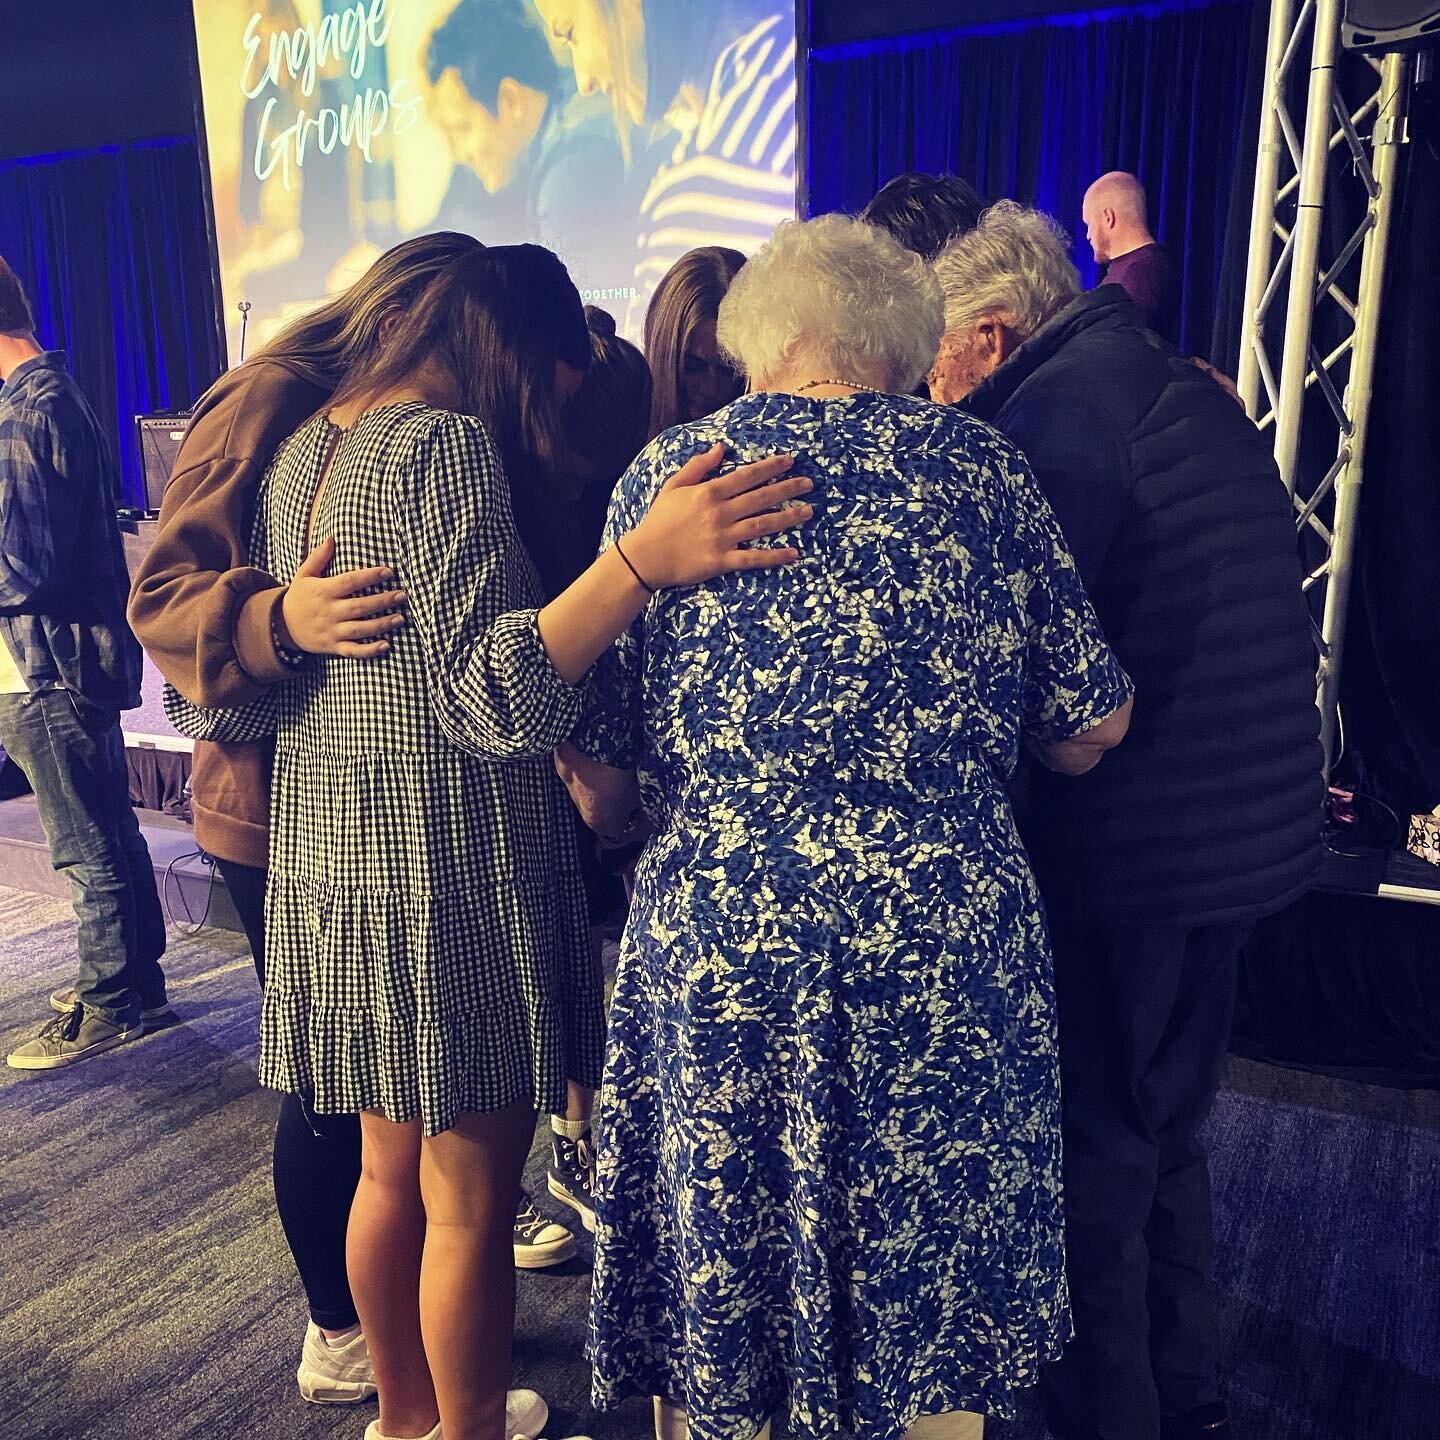 Seniors praying with Teenagers ❤️ &ldquo;Father, thank You for Your beautiful, multicultural, intergenerational family, gathering today in so many countries. Forgive us our many failings, heal our deep divisions, and make us one. Let strangers be wel